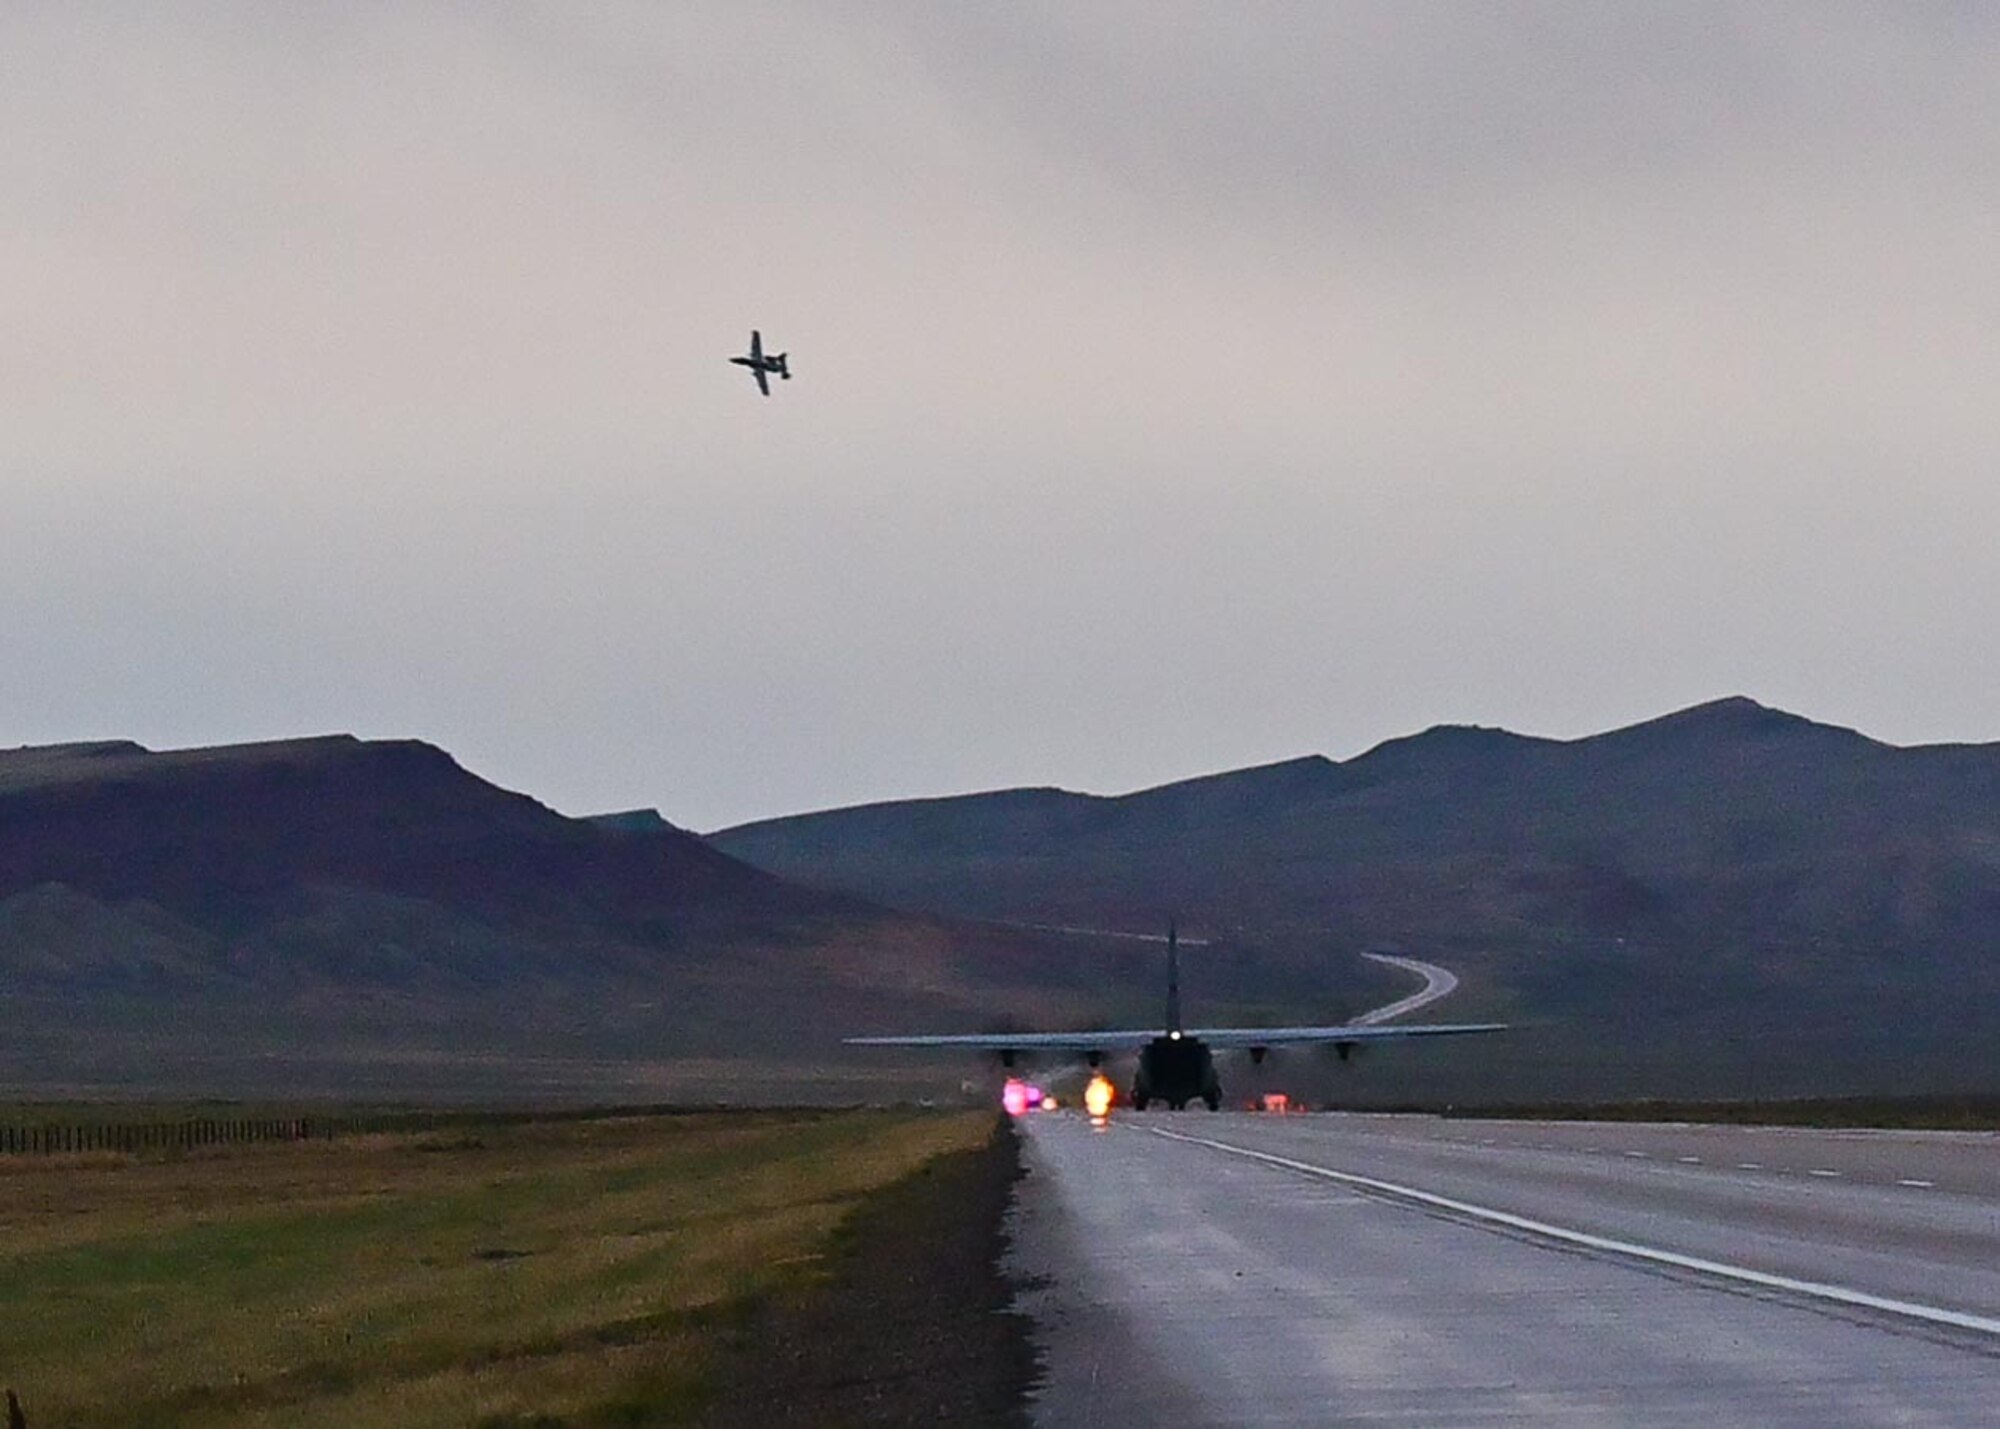 A fighter aircraft in the air above a cargo reversing down a highway